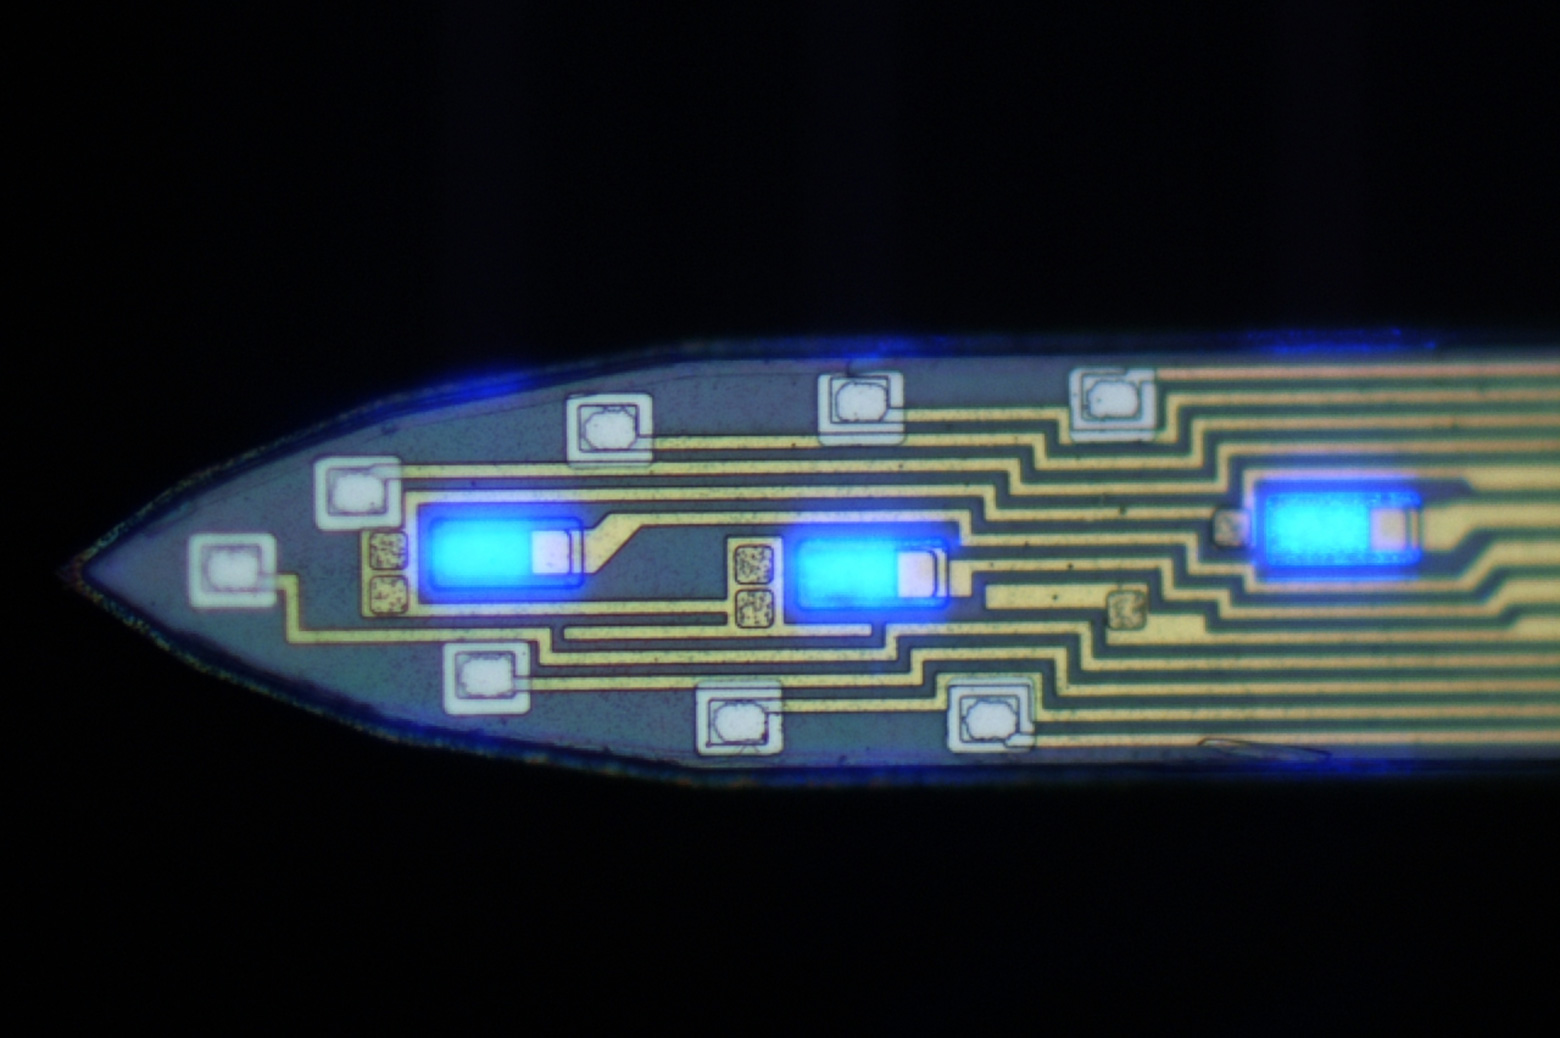 microcircuitry with blue lights and electrodes